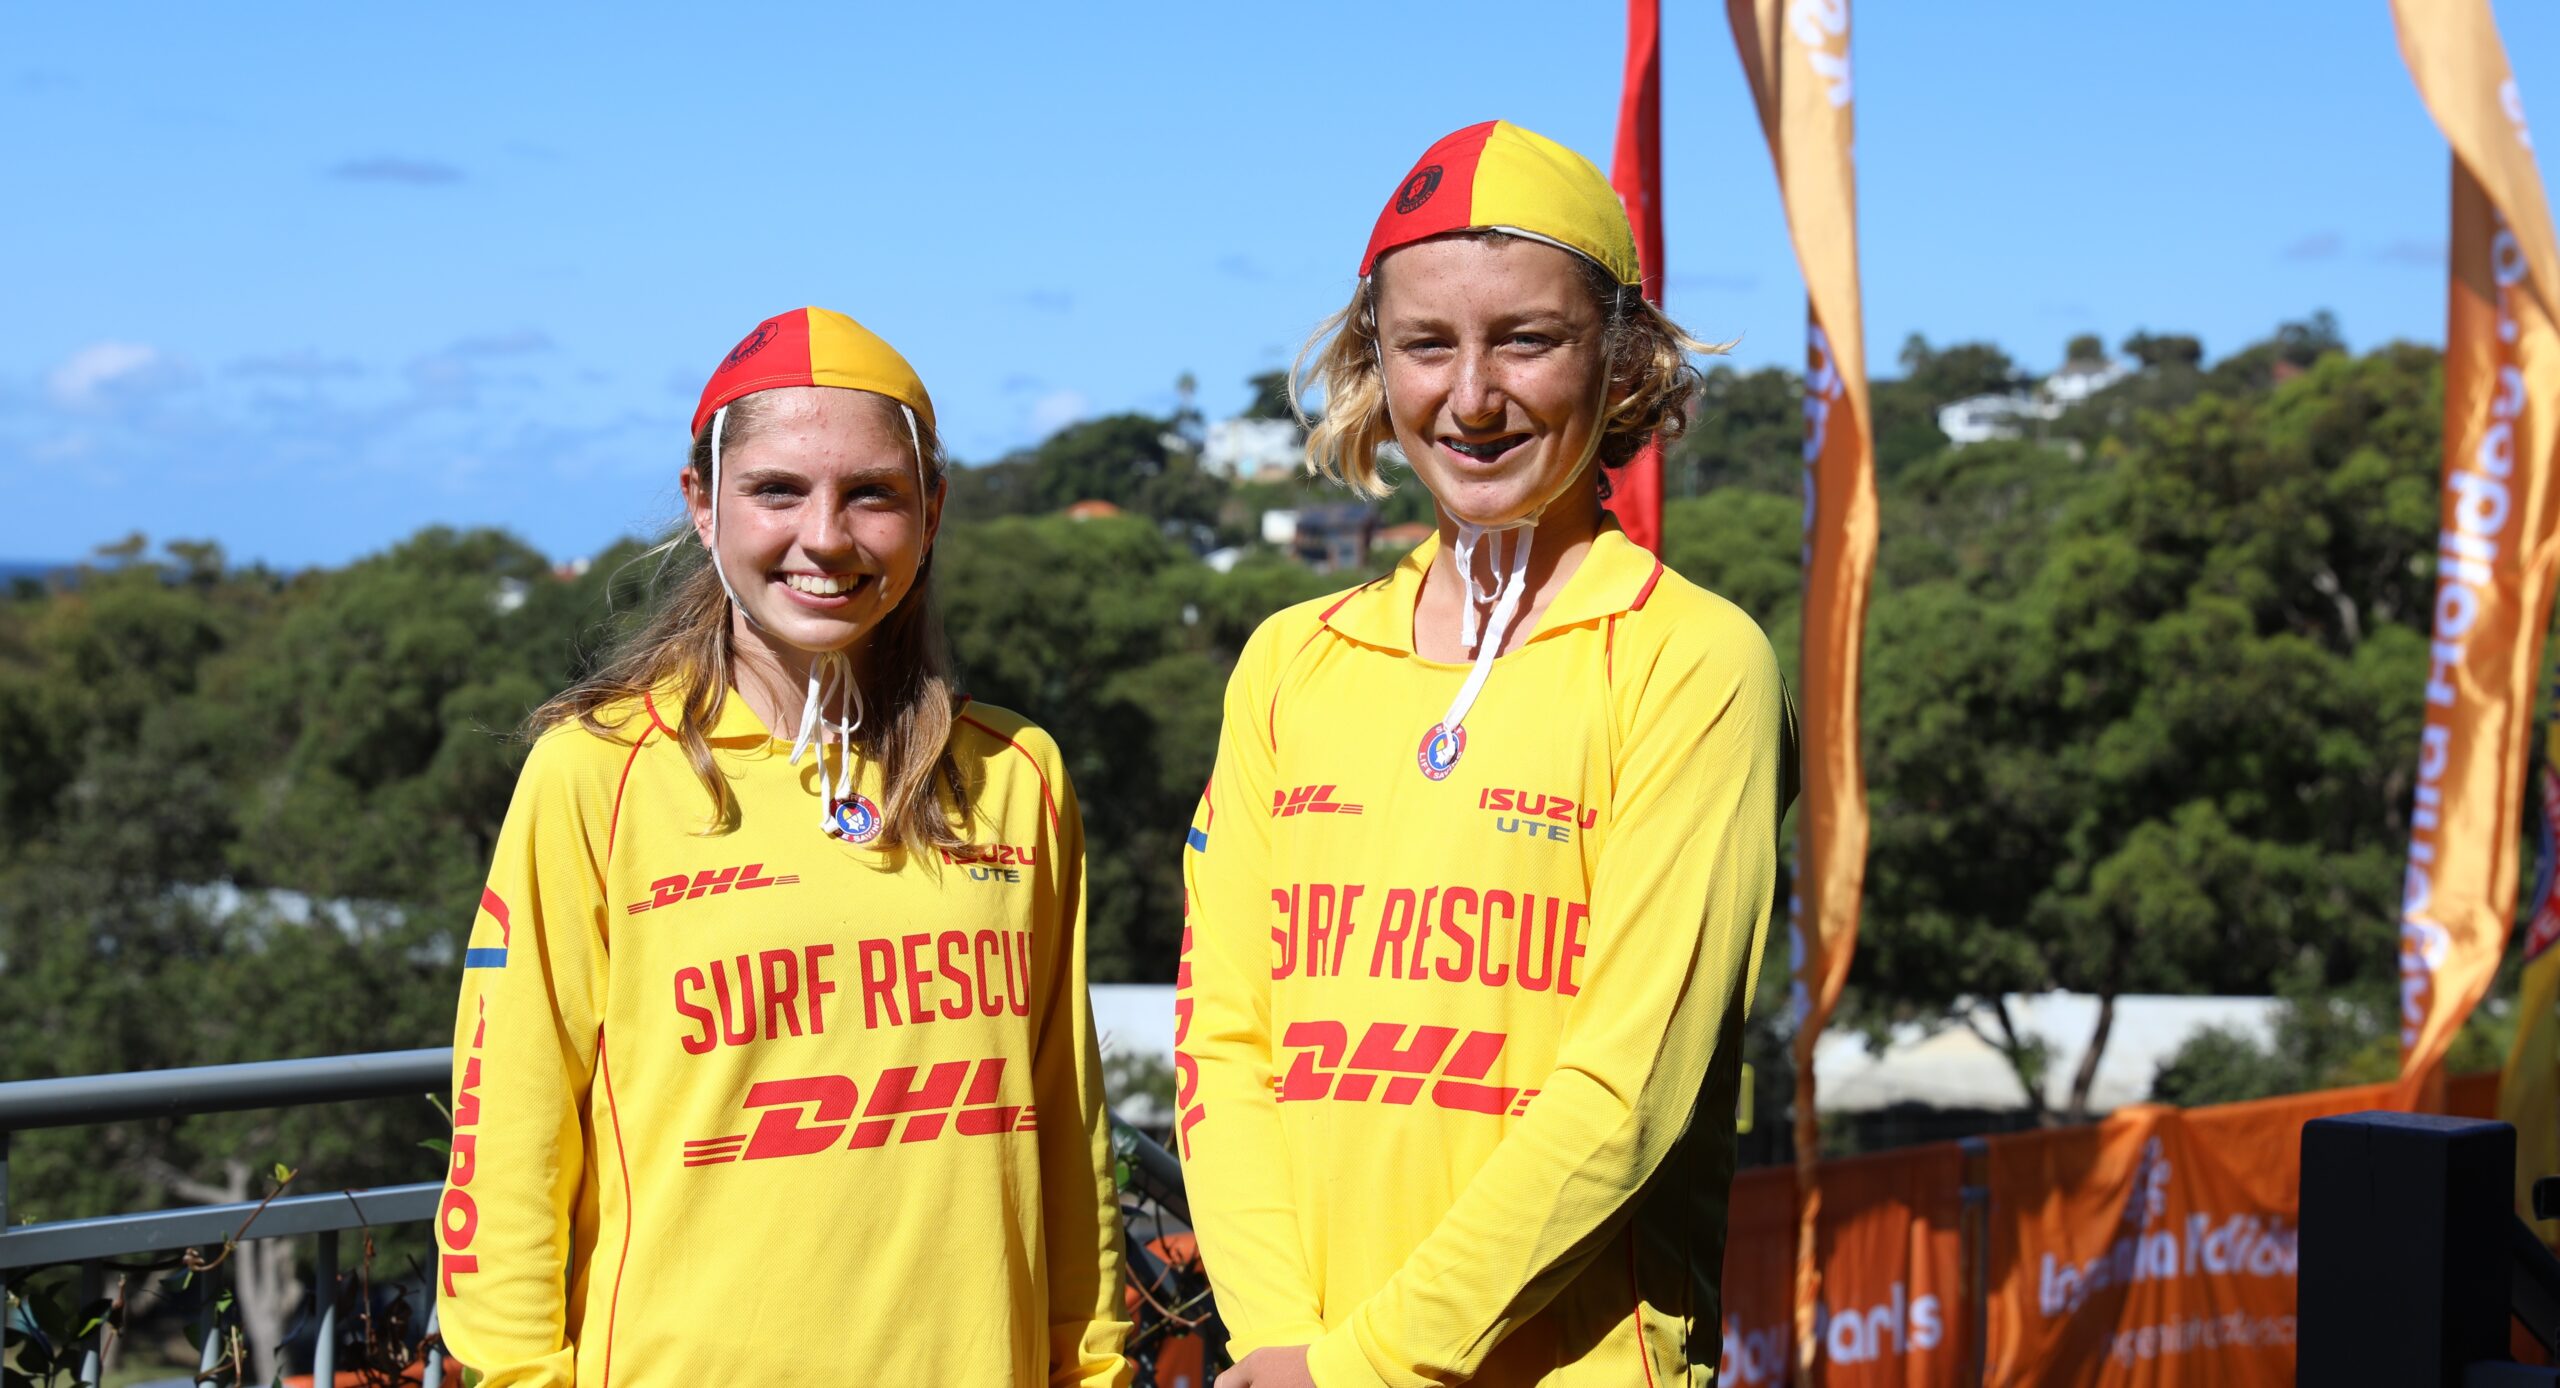 Southern Kids Star as Junior Lifesavers of the Year Announced